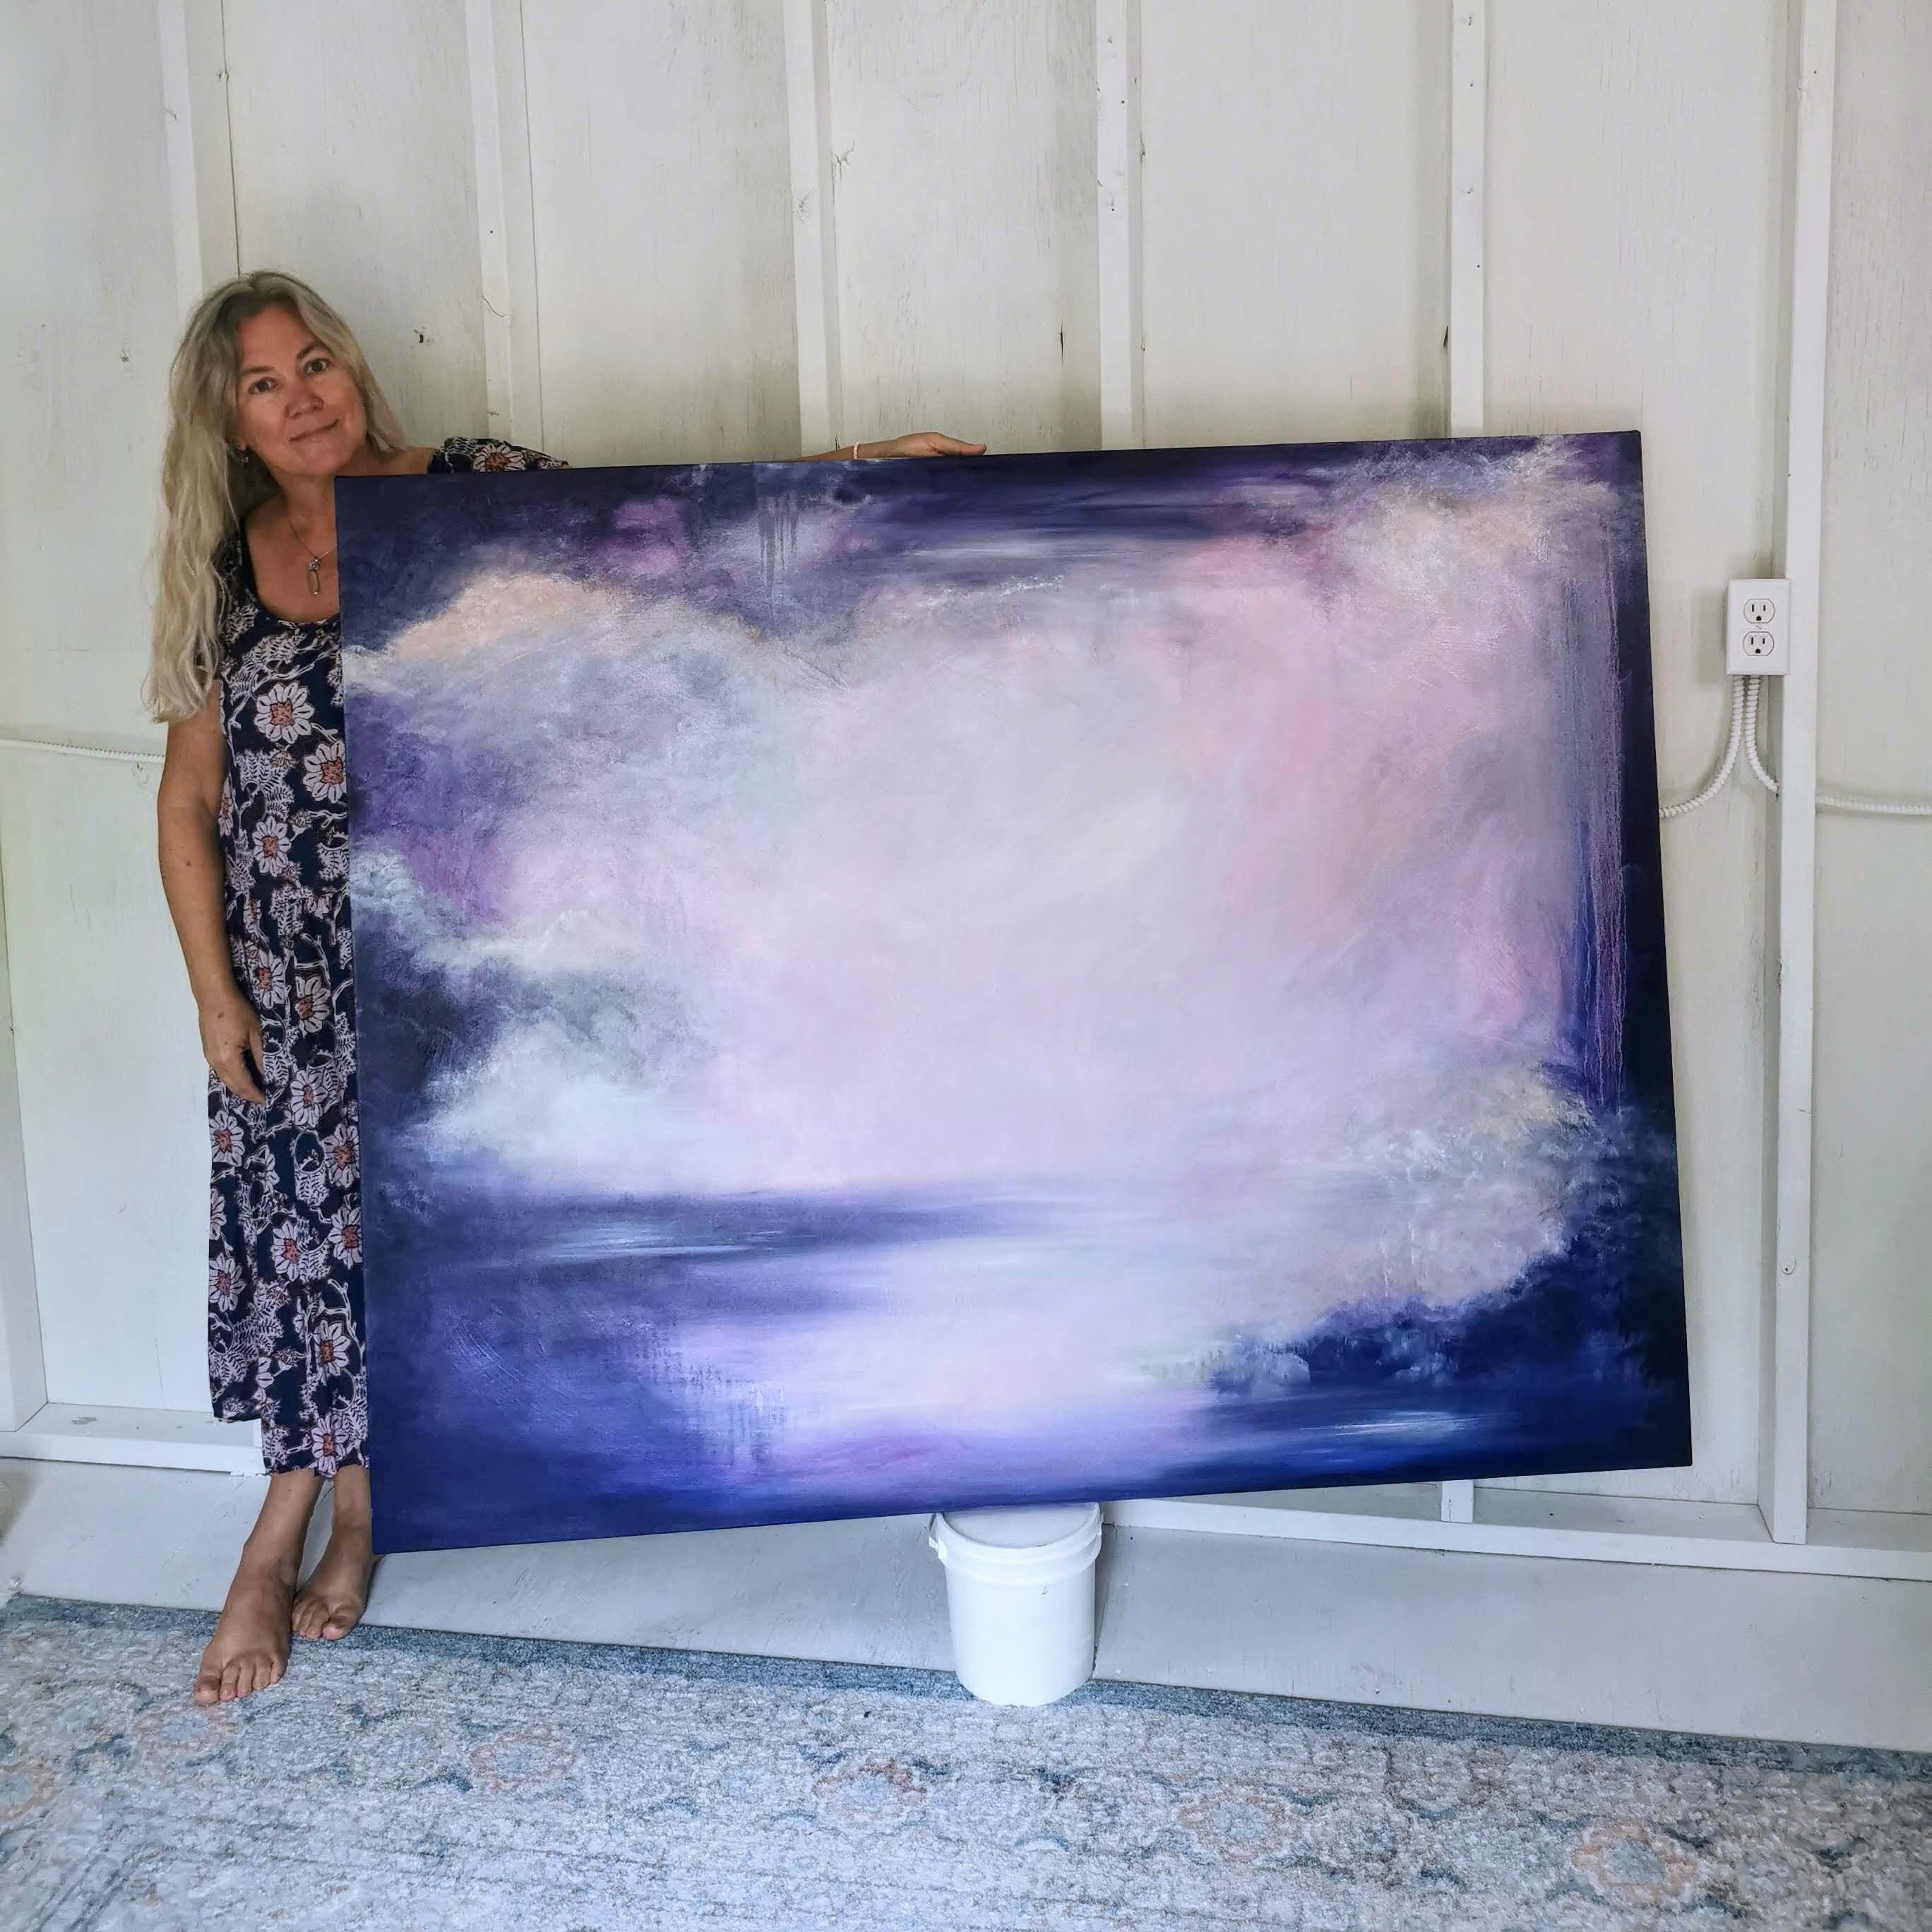 Violet night of the soul - Large violet abstract landscape painting - Gray Abstract Painting by Jennifer L. Baker